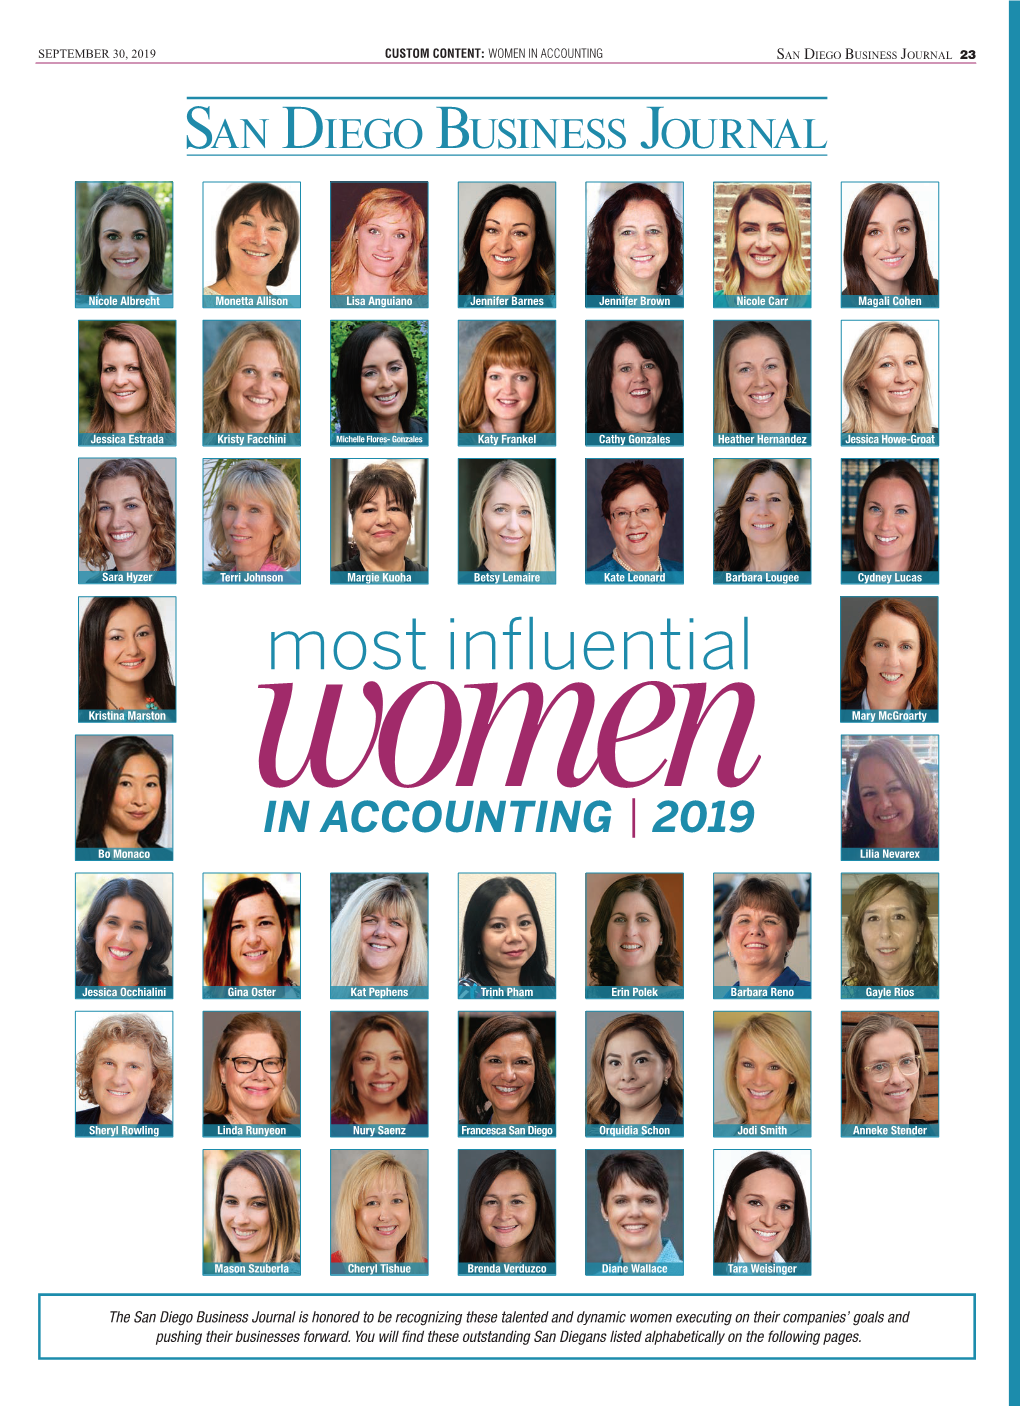 The San Diego Business Journal Is Honored to Be Recognizing These Talented and Dynamic Women Executing on Their Companies’ Goals and Pushing Their Businesses Forward